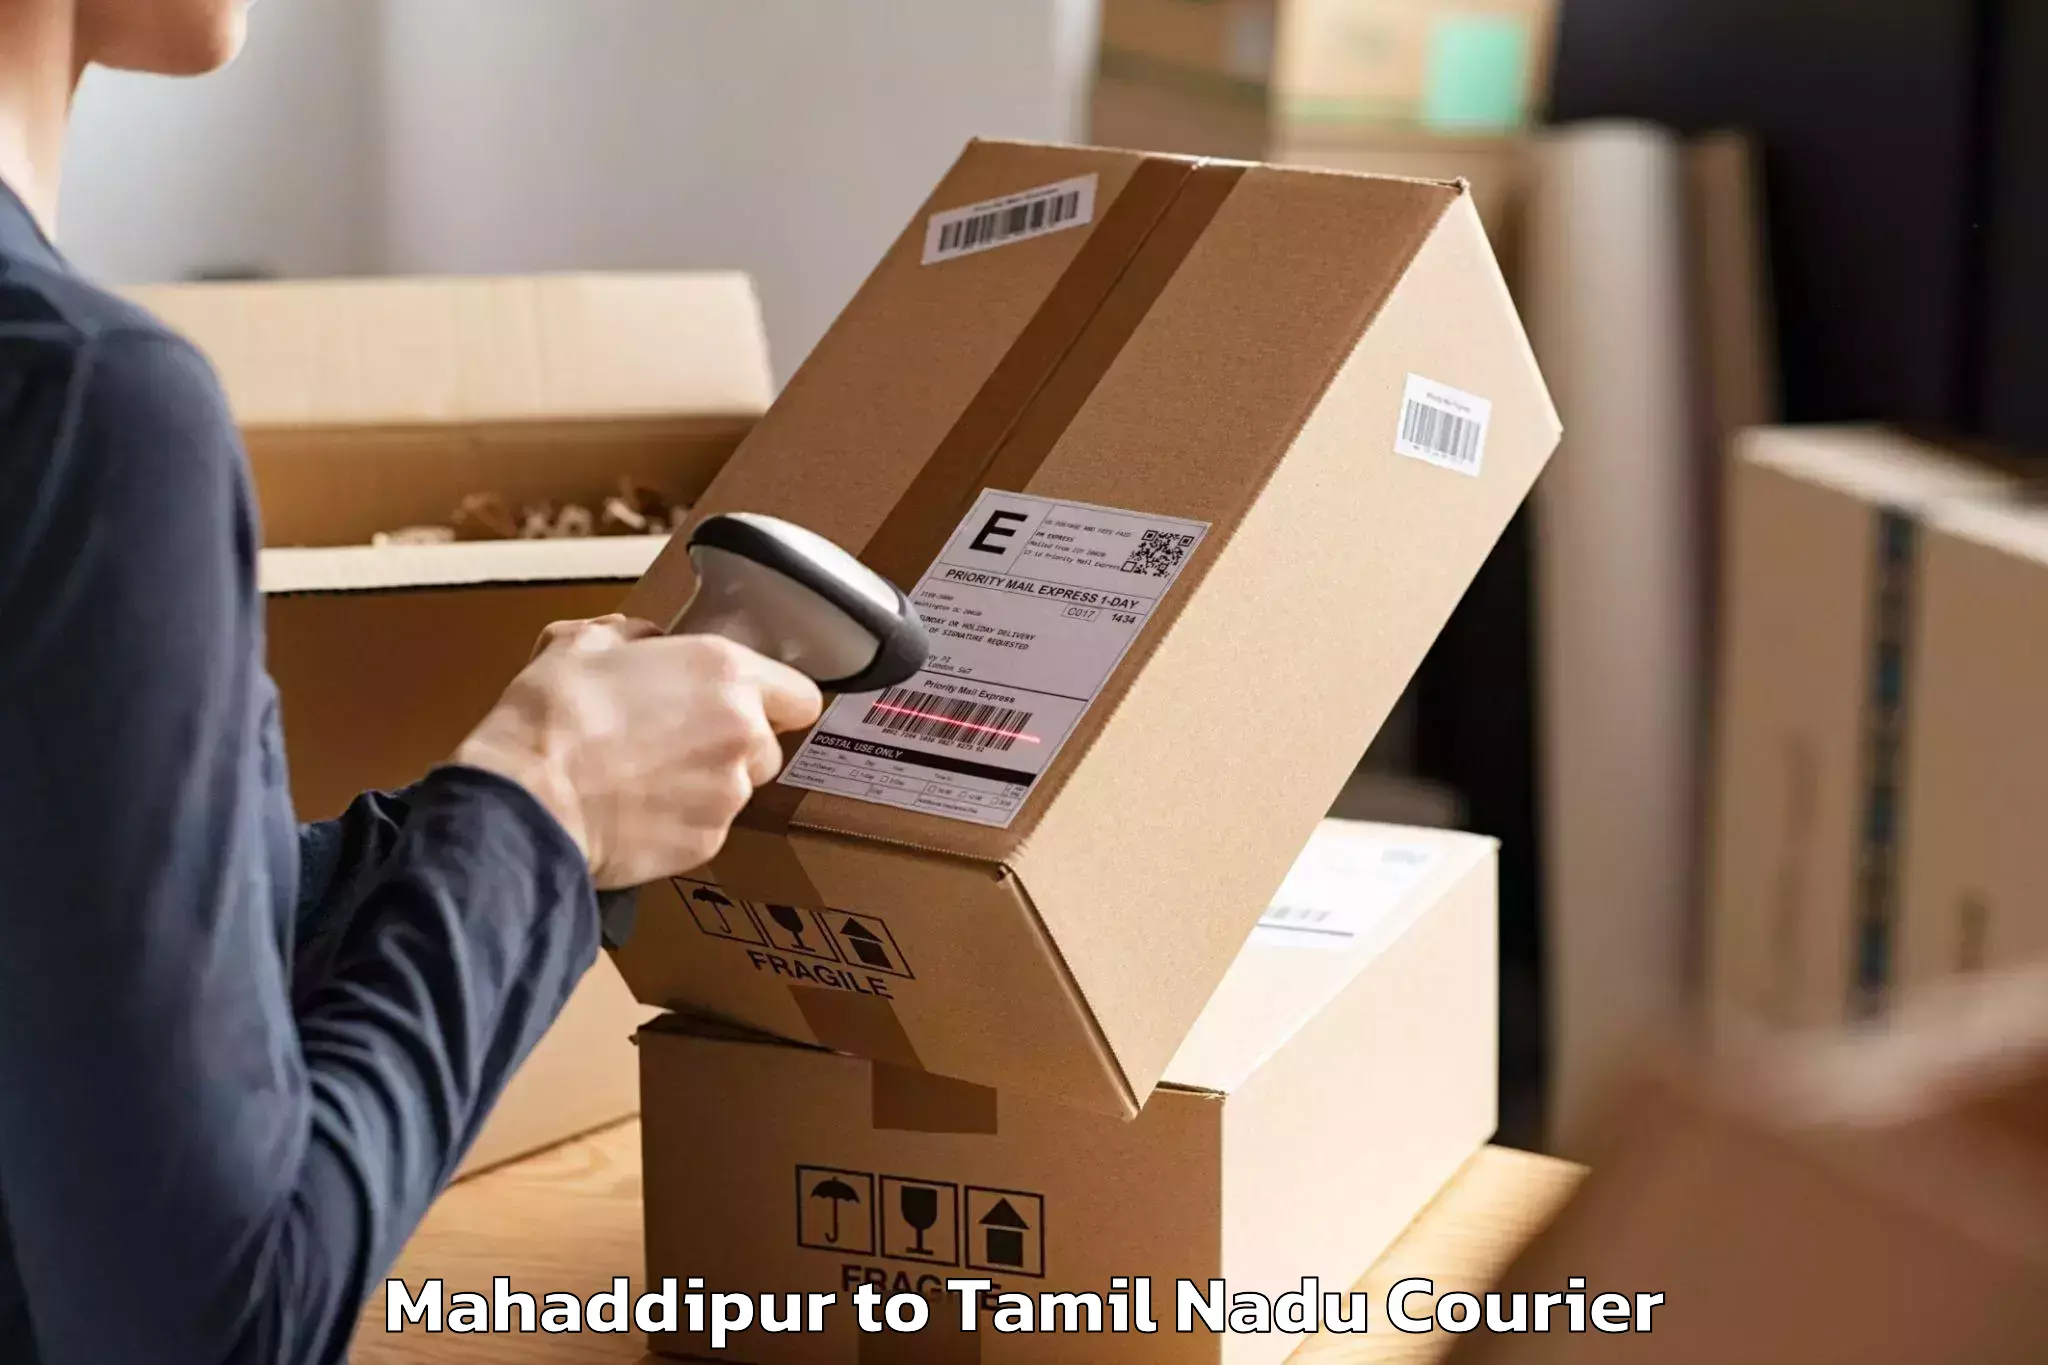 Moving and storage services in Mahaddipur to Vellore